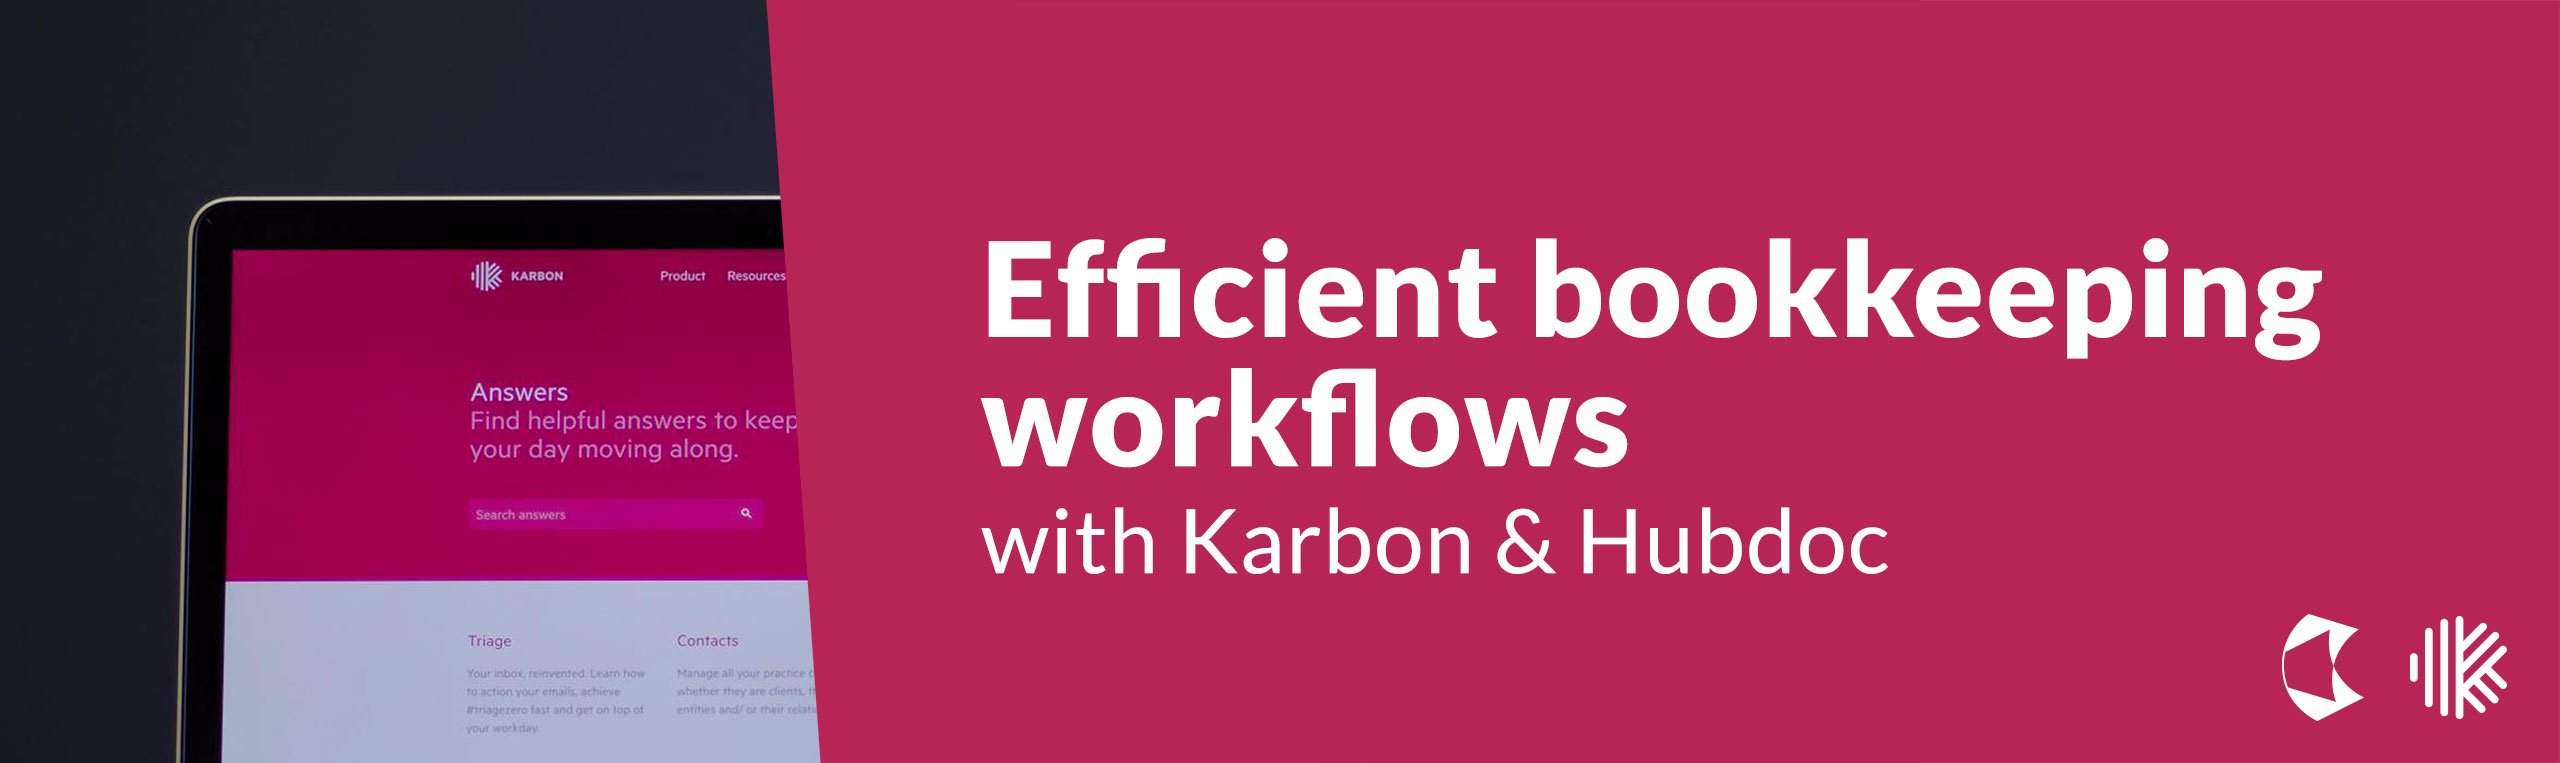 Efficient Bookkeeping Workflows with Karbon and Hubdoc